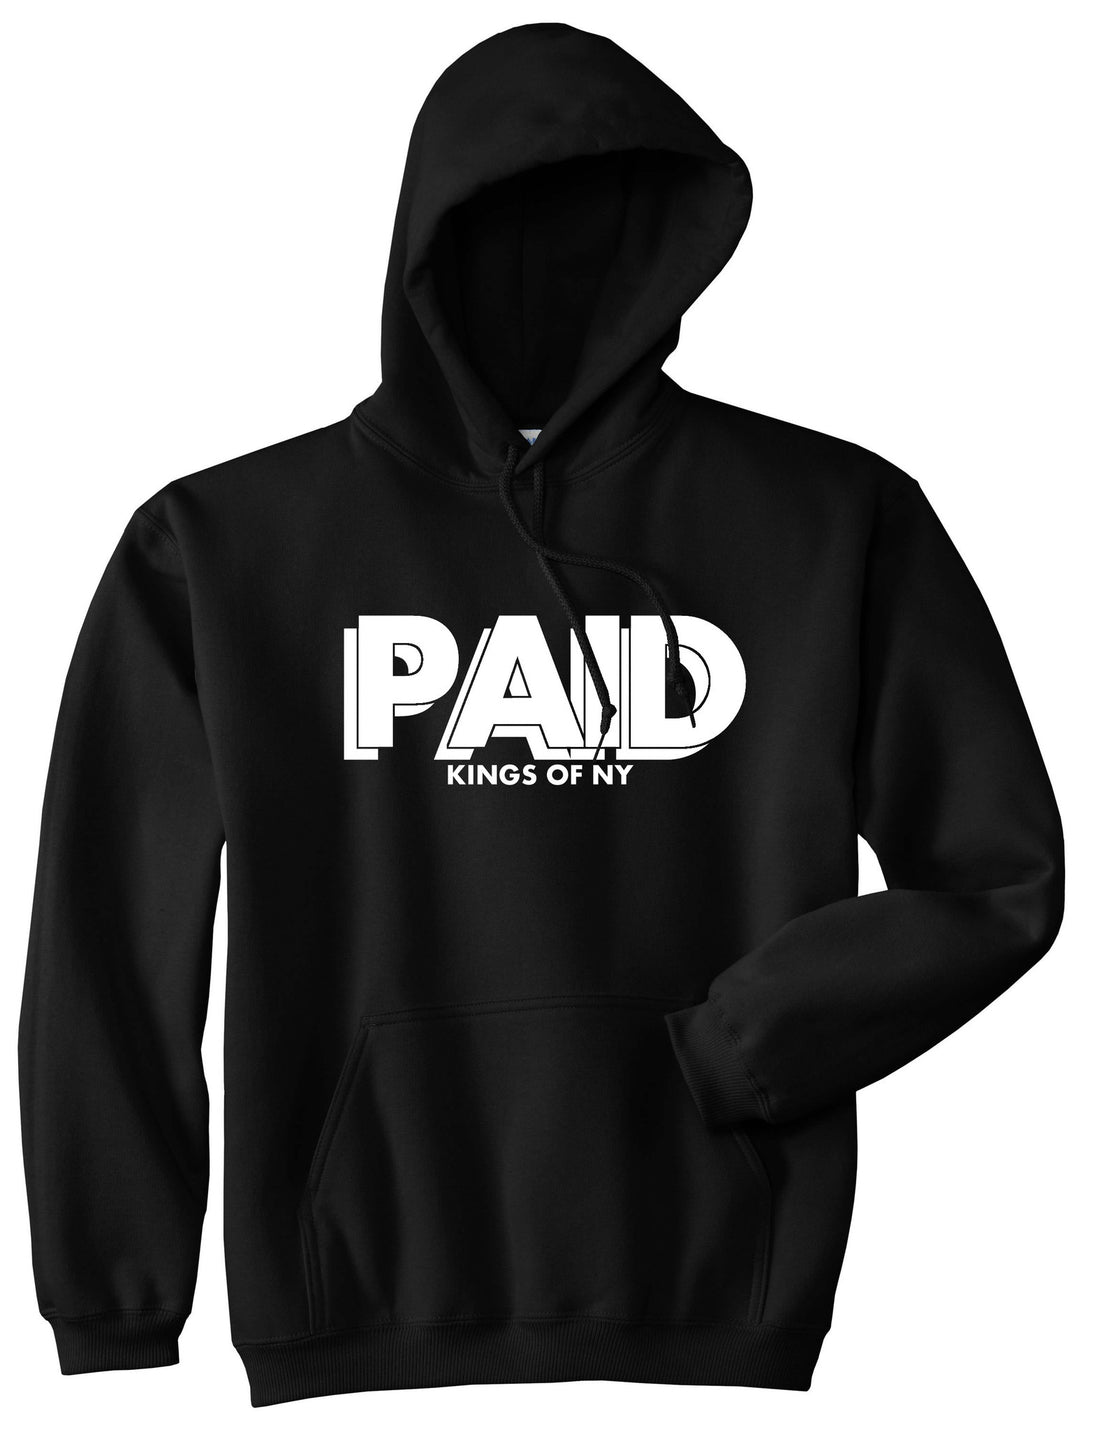 PAID Kings Of NY W15 Pullover Hoodie in Black By Kings Of NY